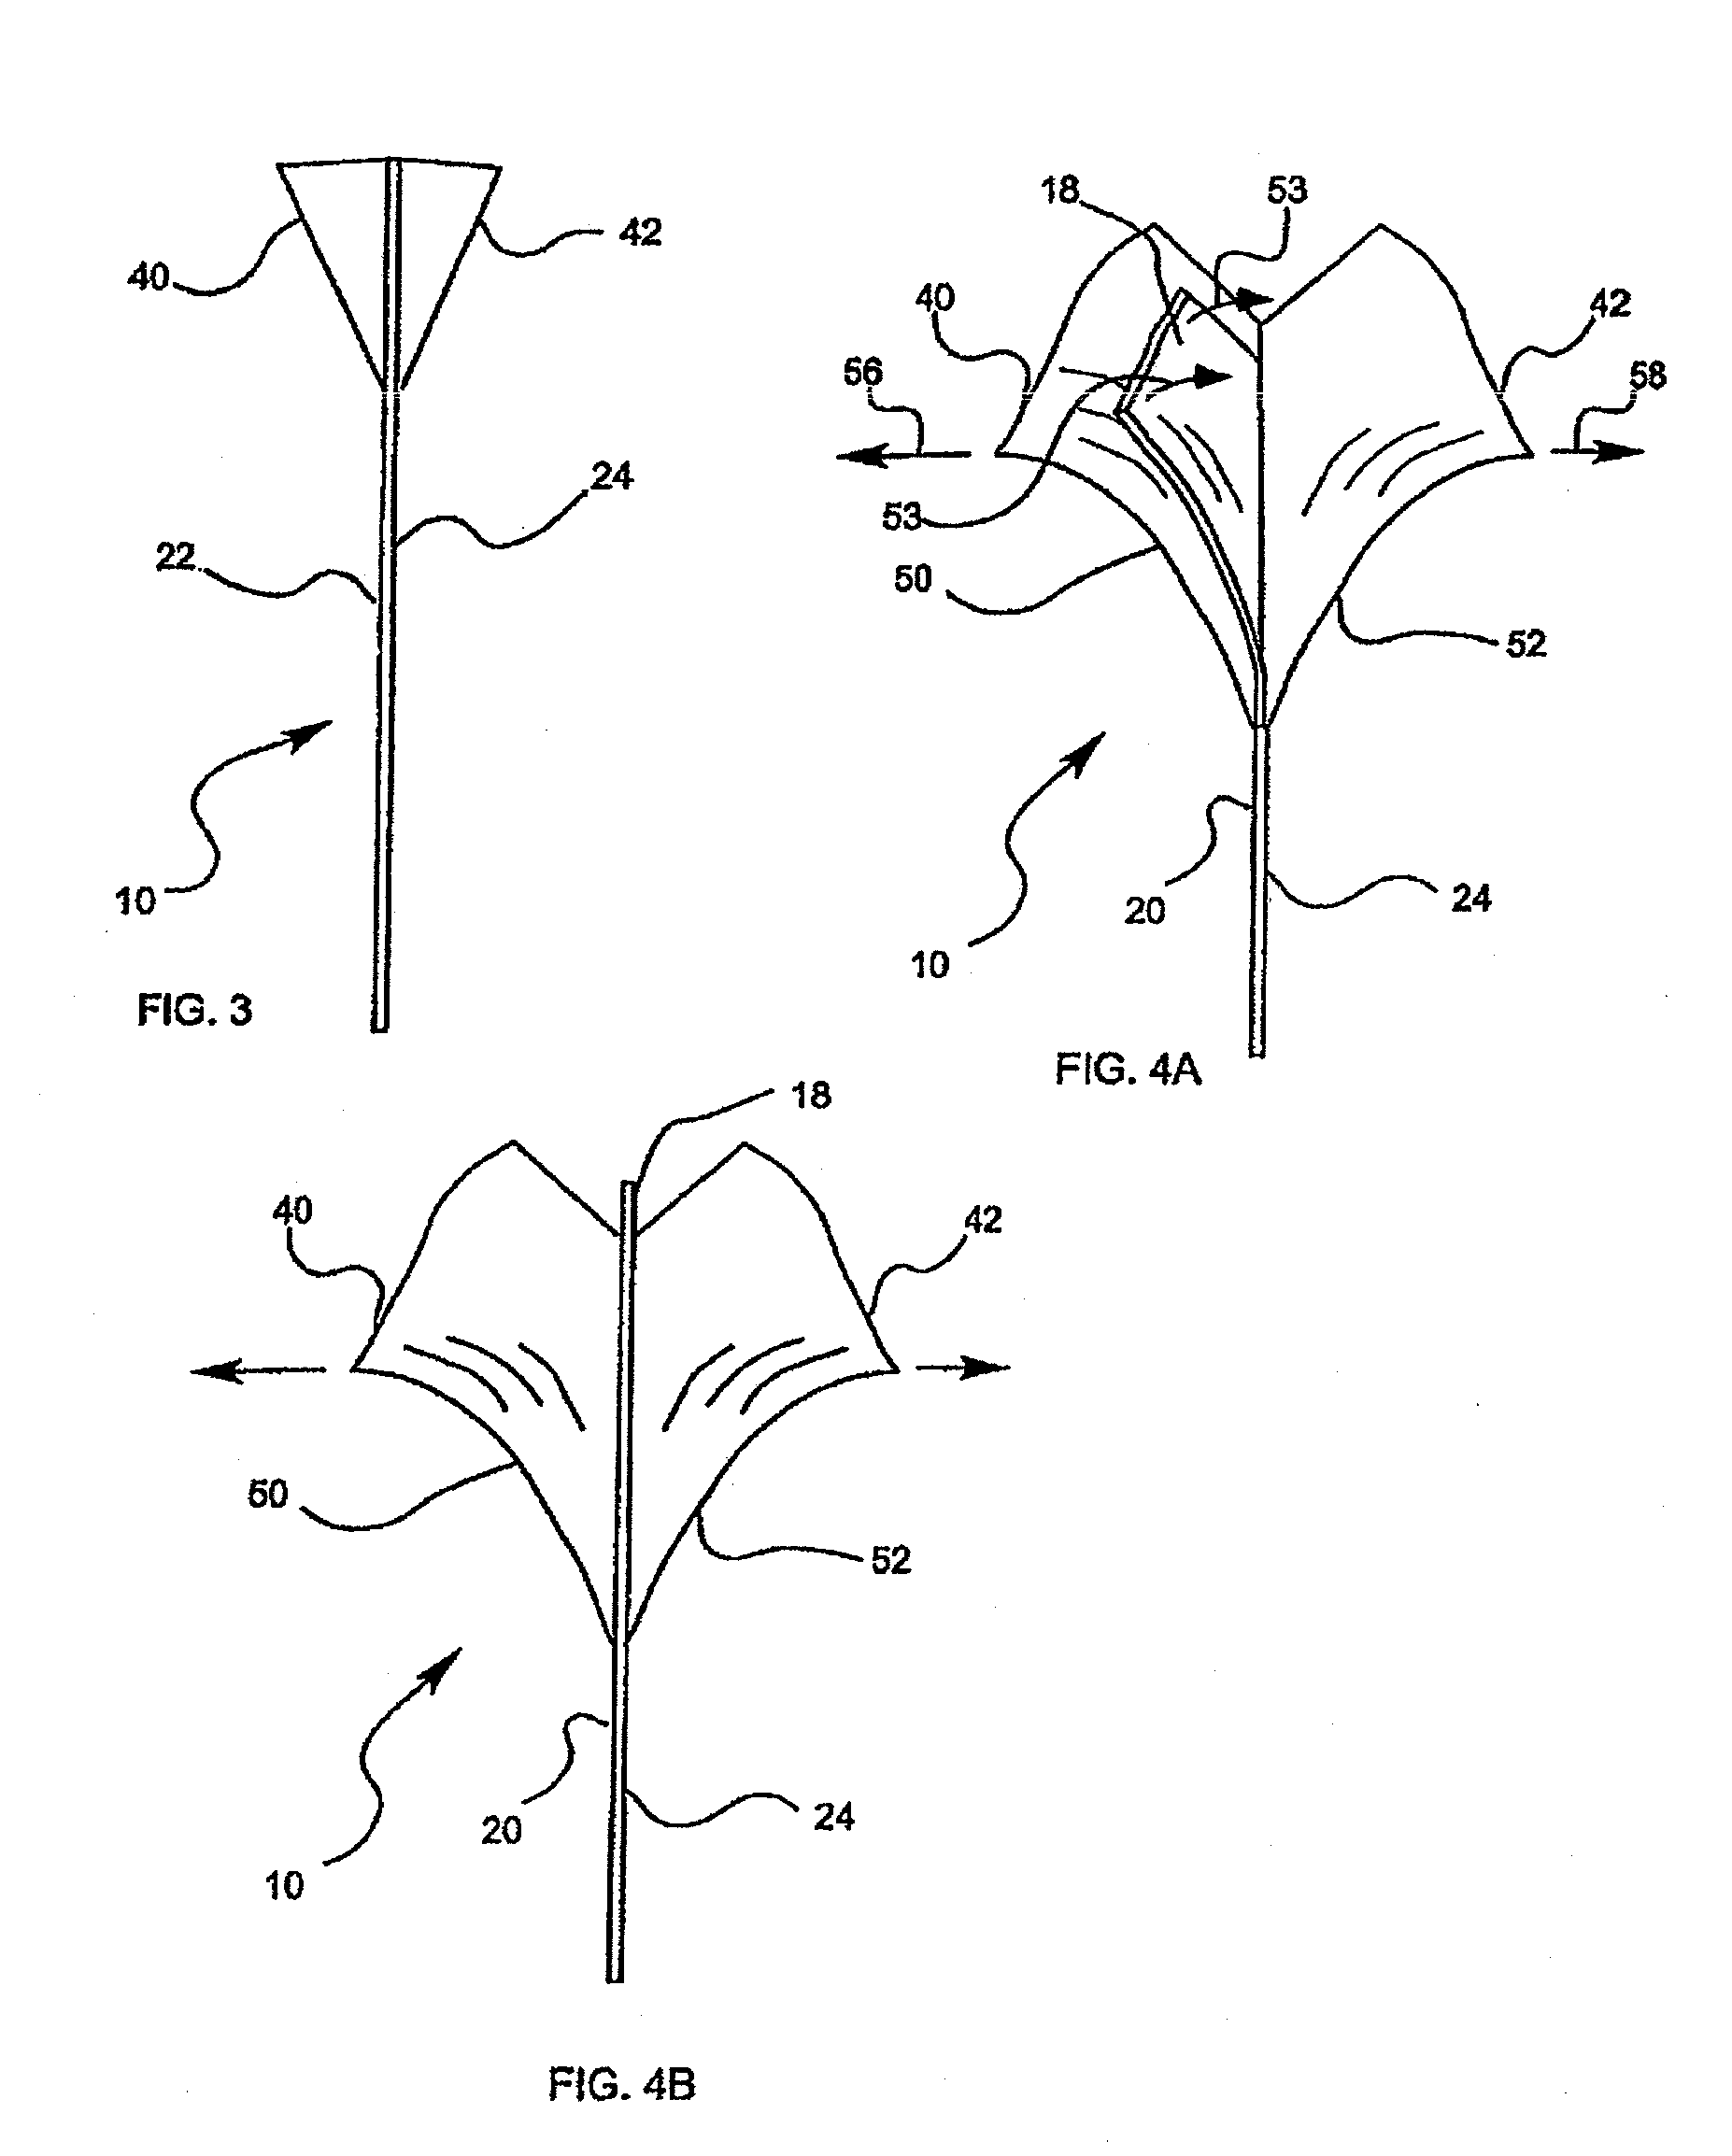 Peelable Pouch for Transdermal Patch and Method for Packaging